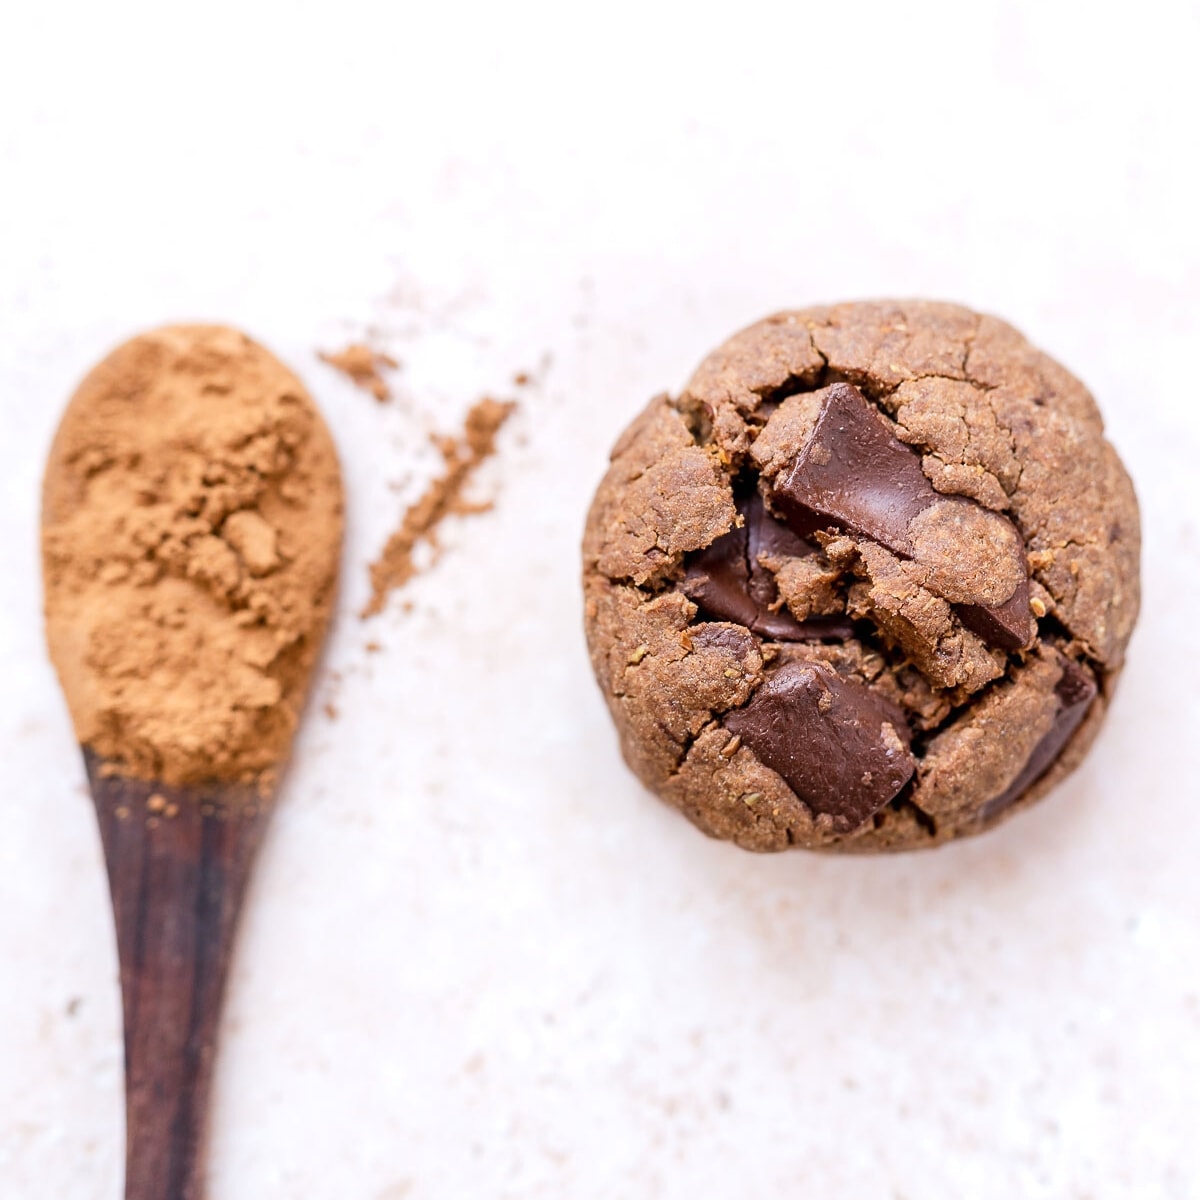 A wooden spoon filled with cacao powder rests next to a large brown chocolate cookie.